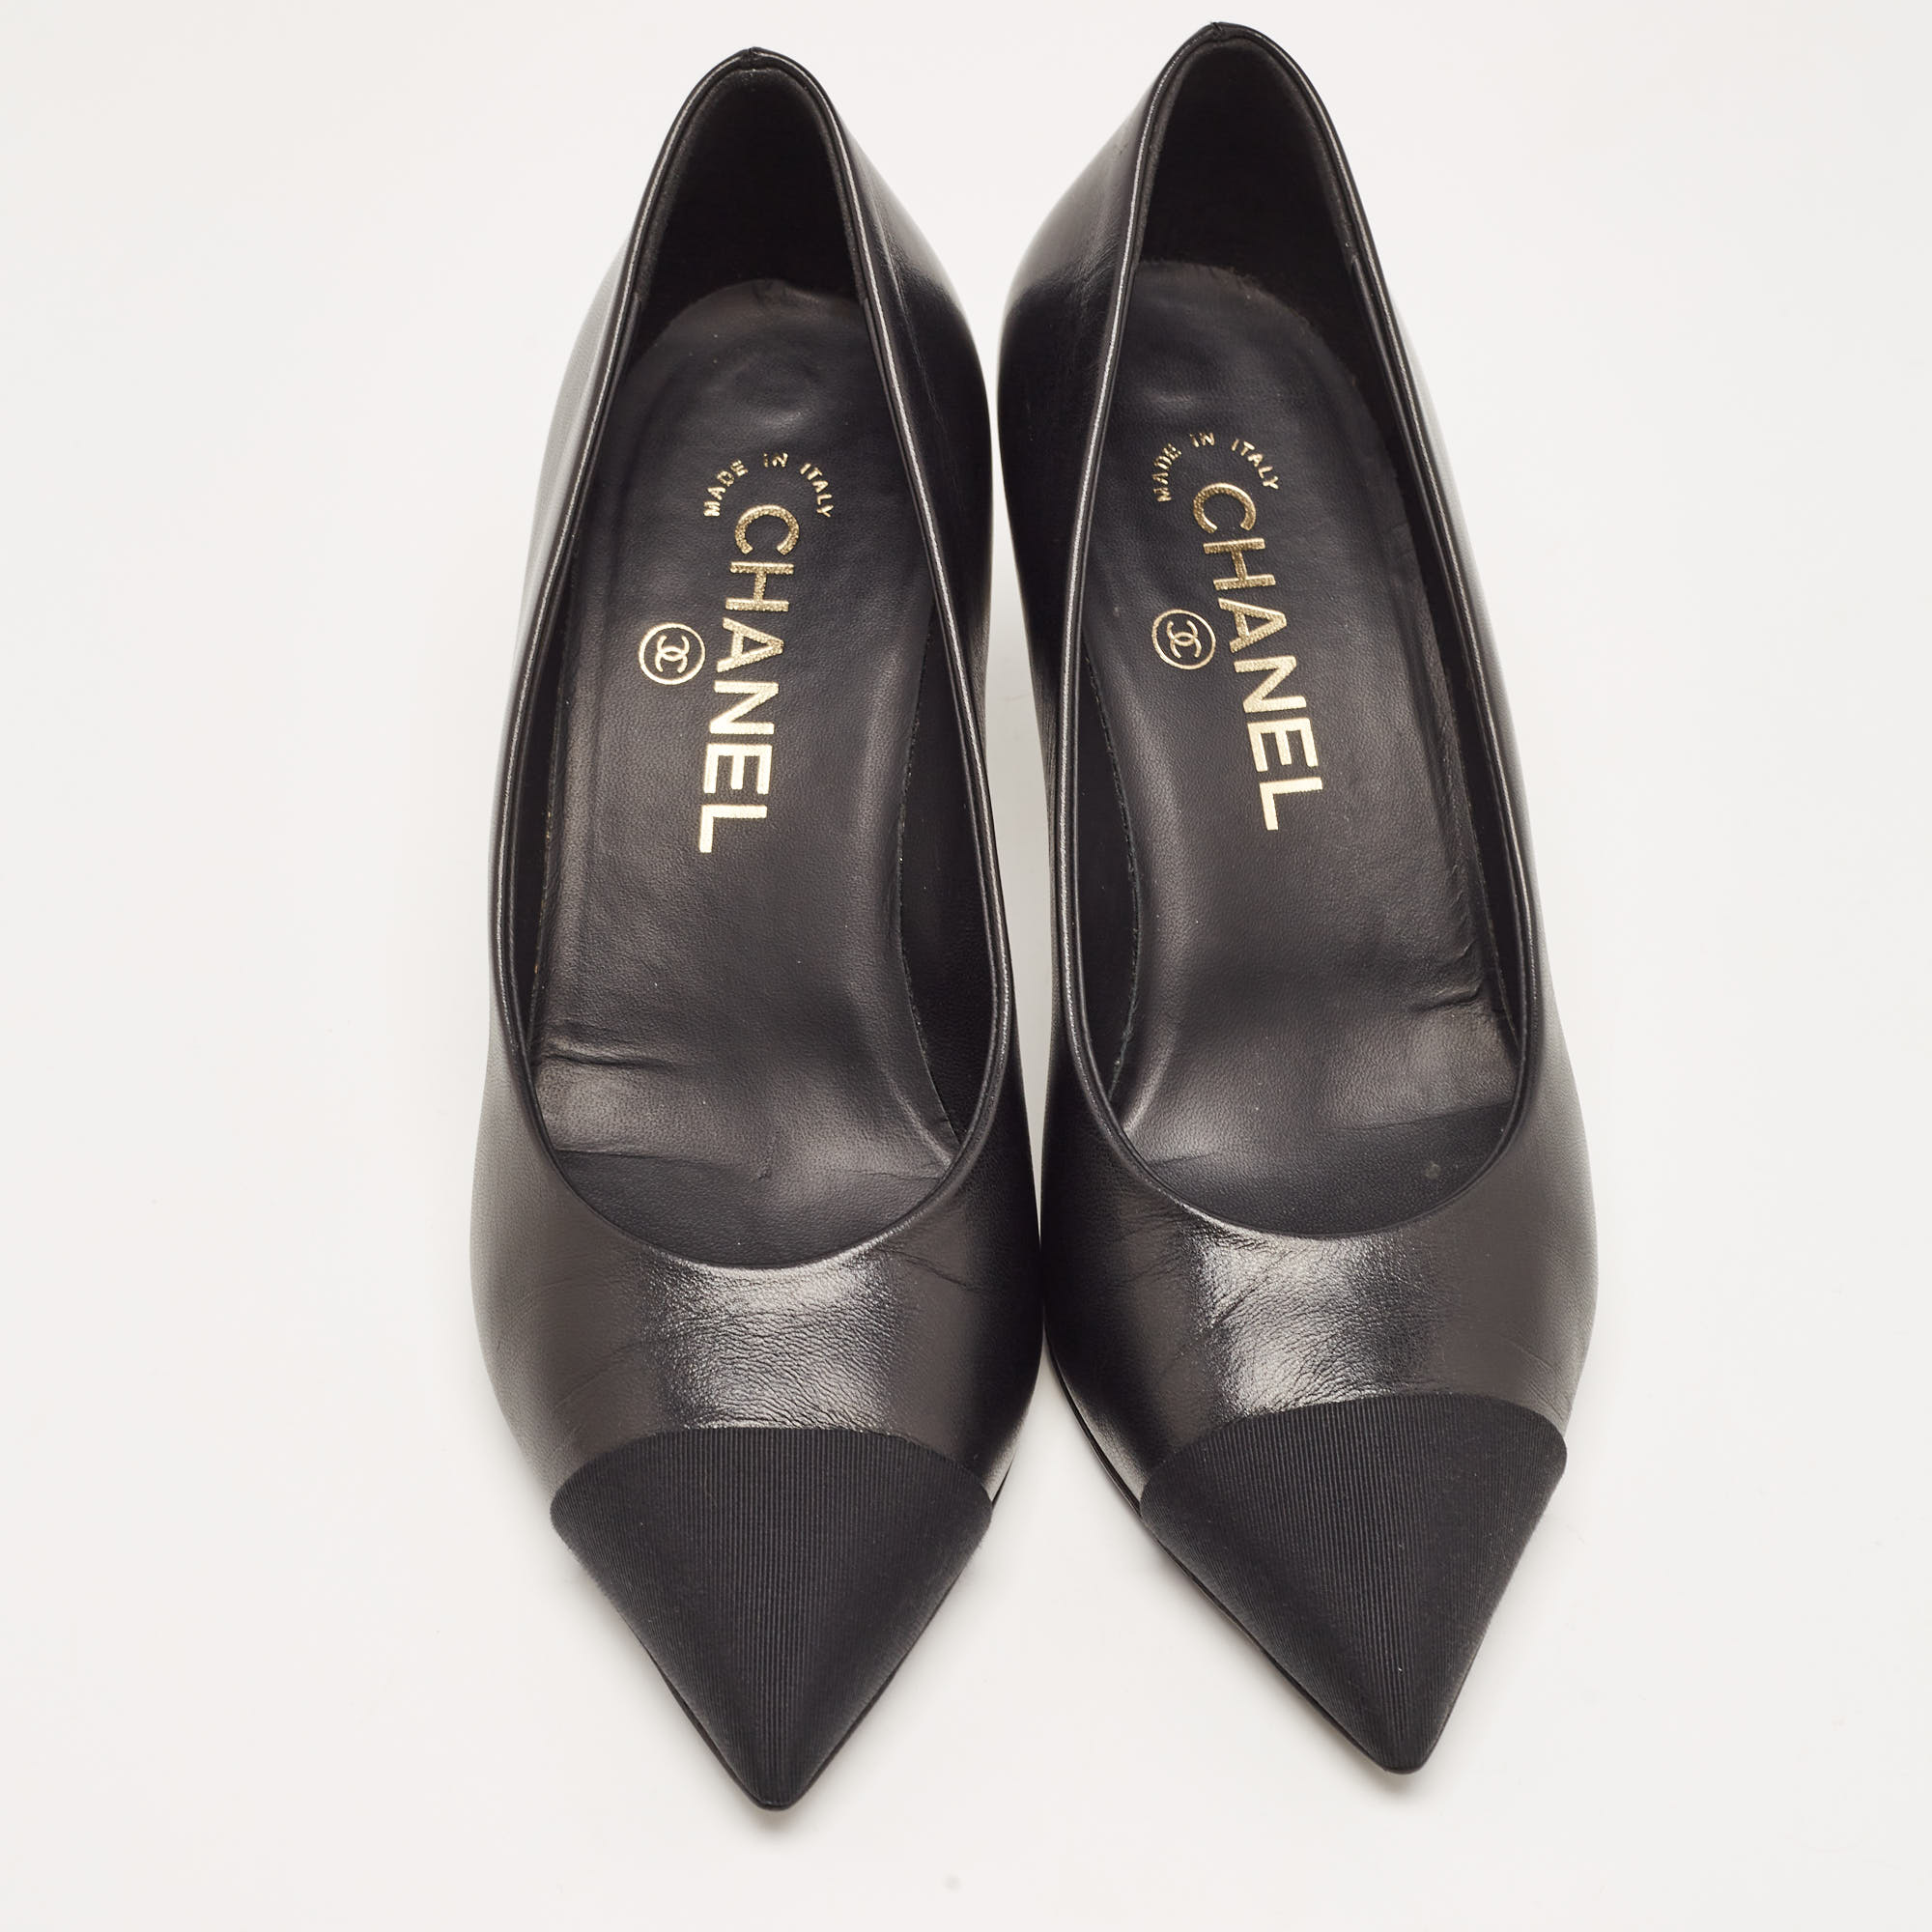 Chanel Black Leather And Canvas CC Pointed Toe Pumps Size 36